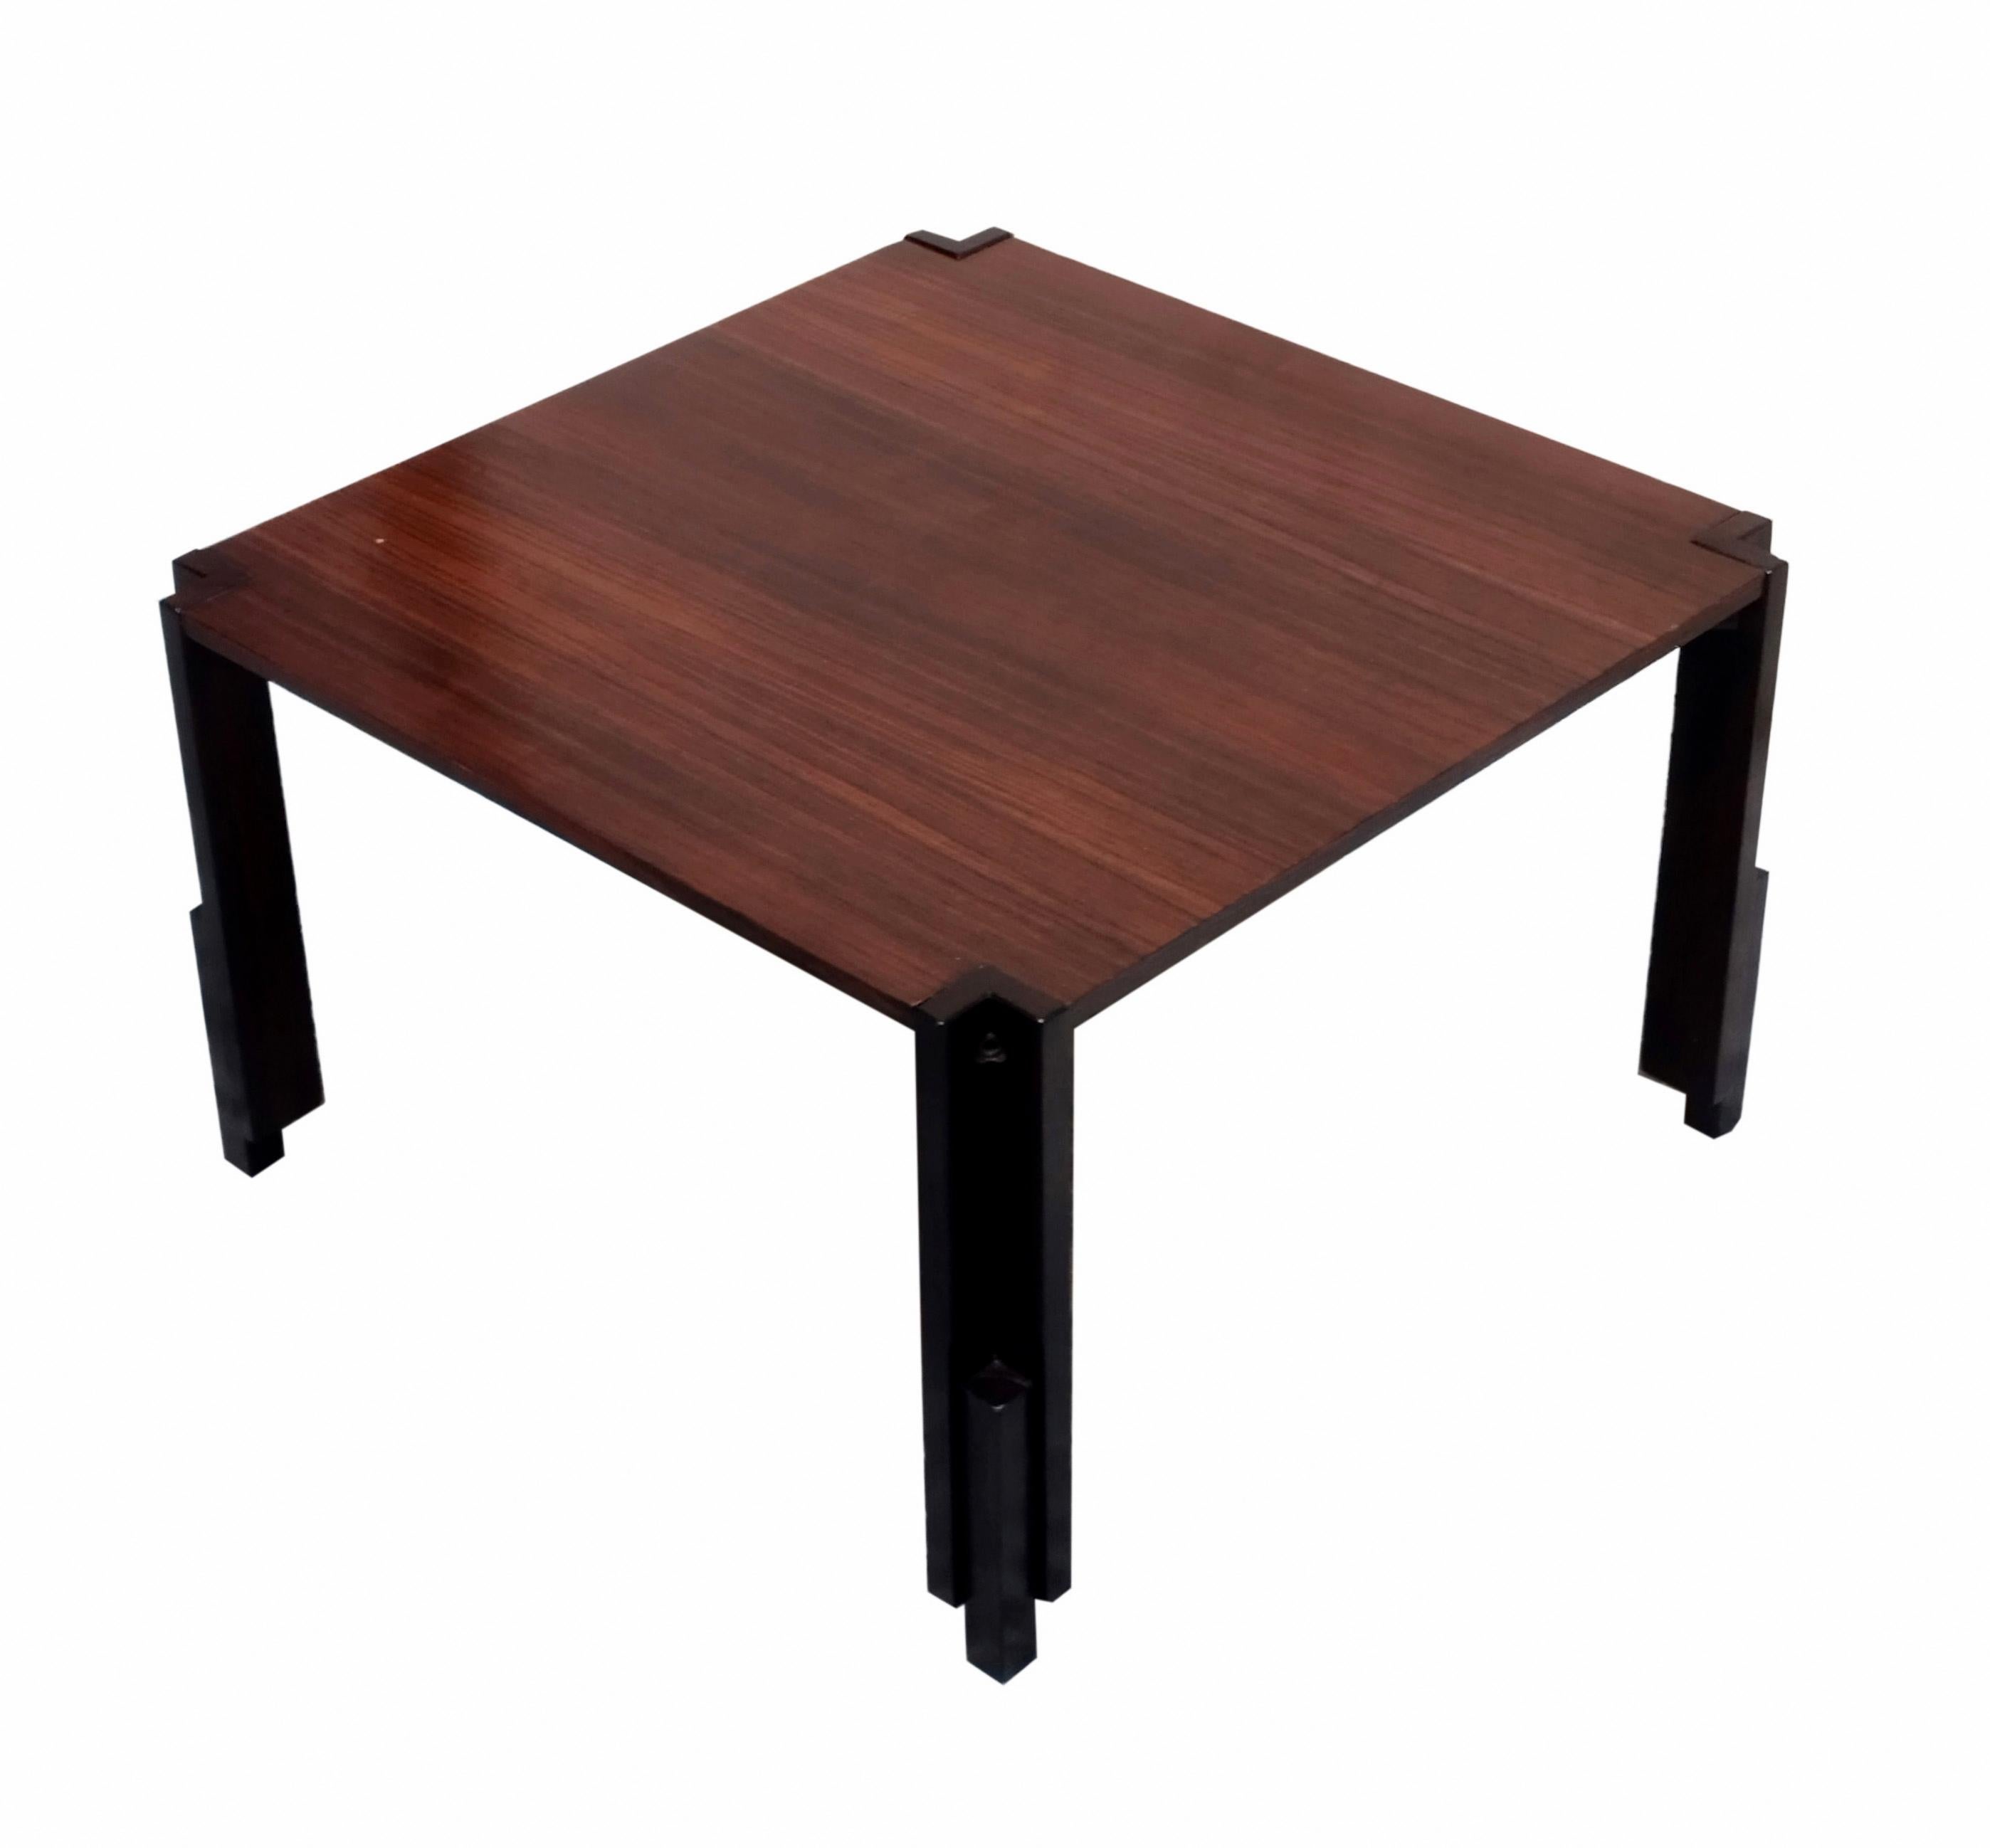 Mid-Century Modern Small Square Wooden Coffee Table, Italy, 1960s For Sale